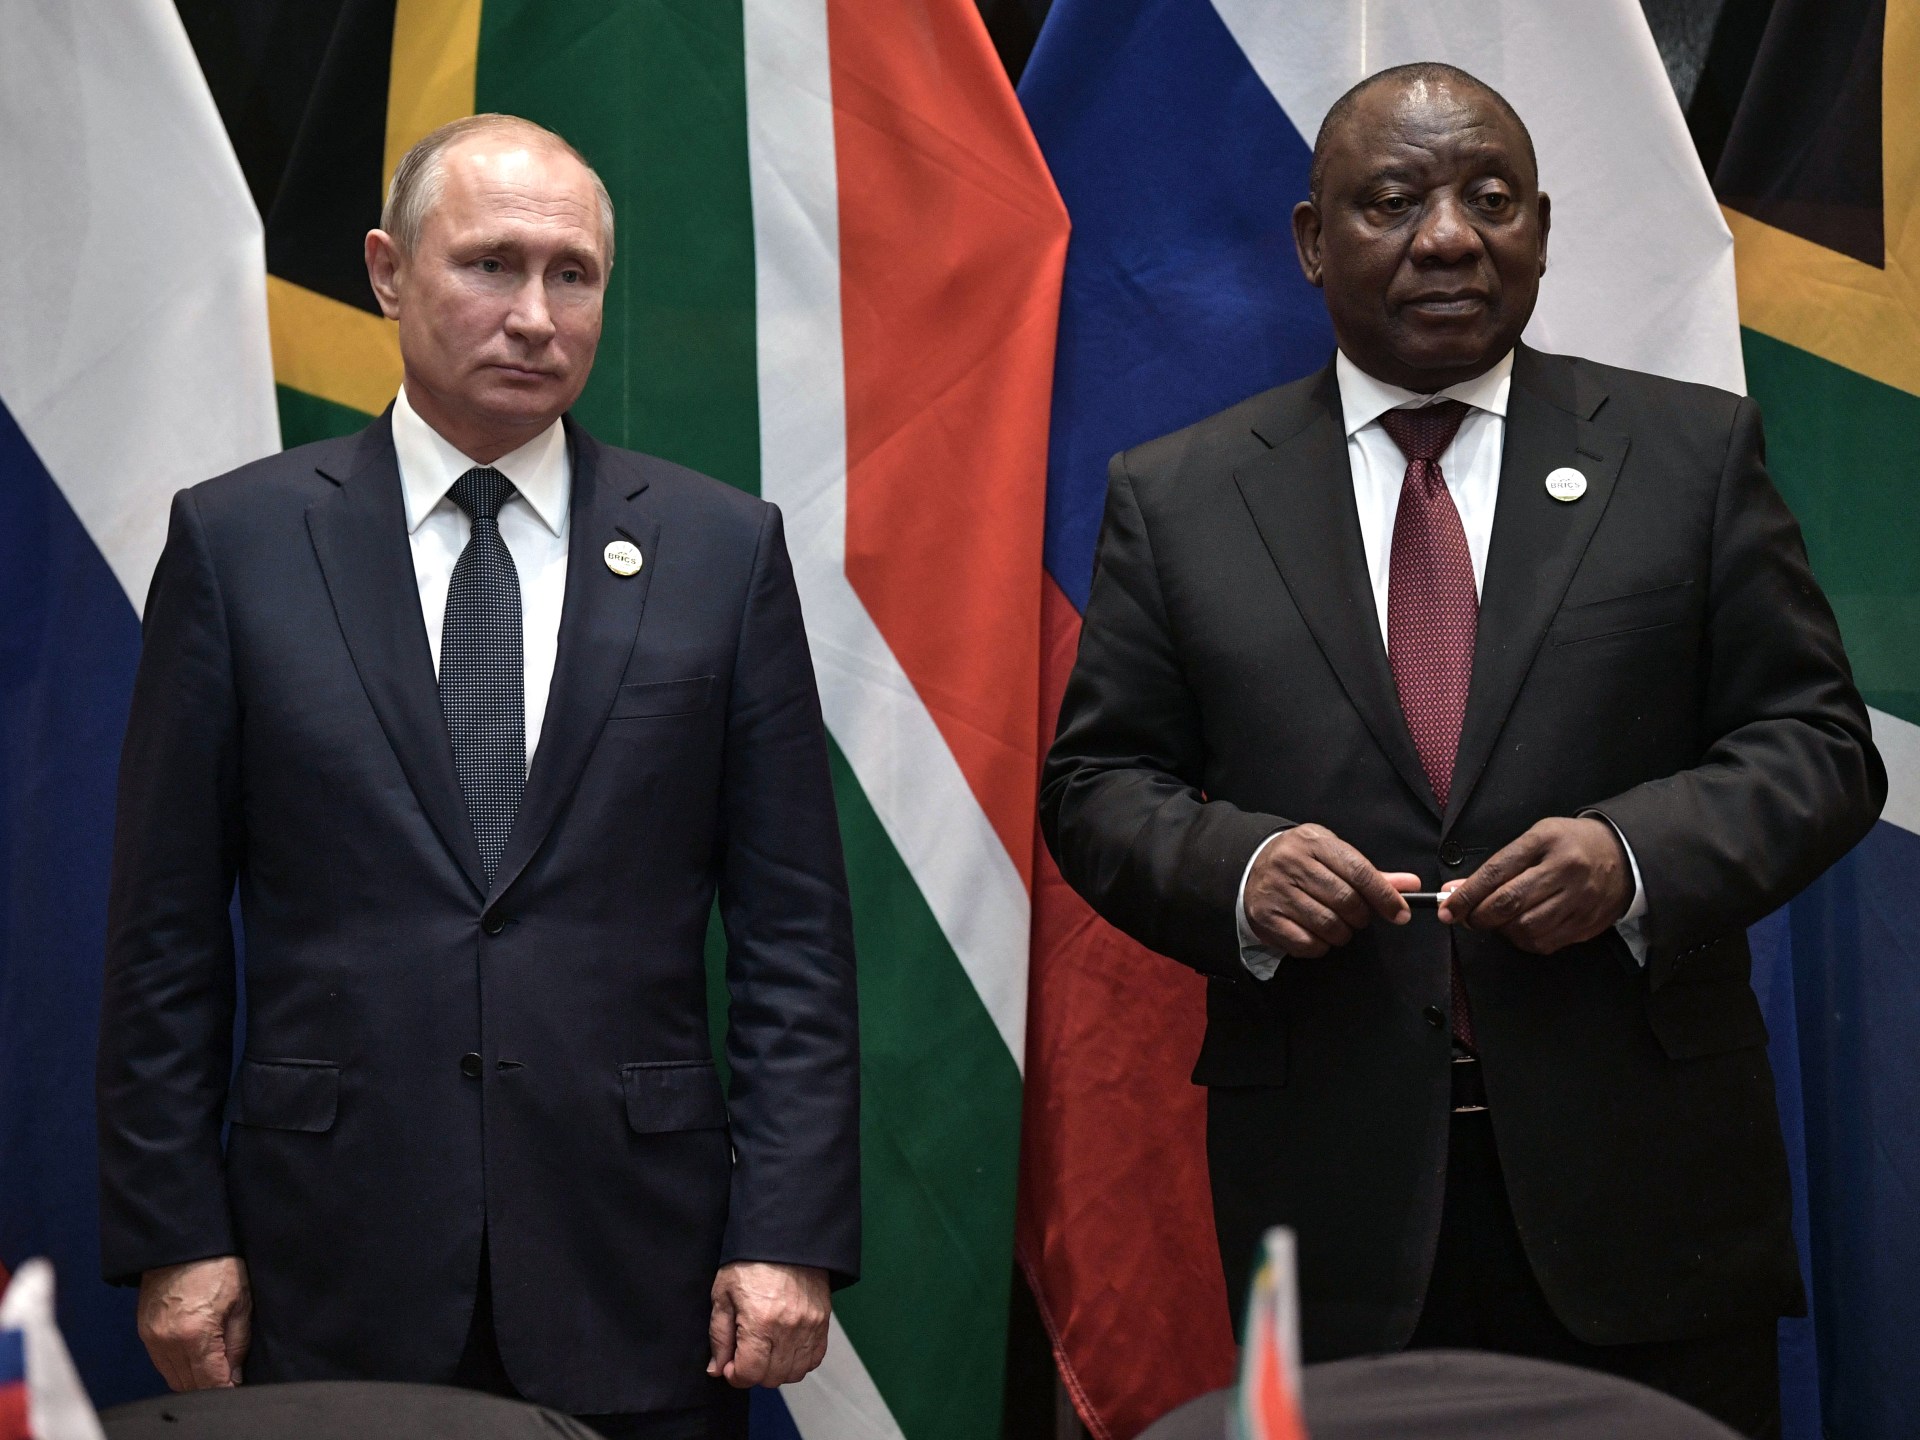 Putin ICC warrant debate goes on in South Africa: All the details